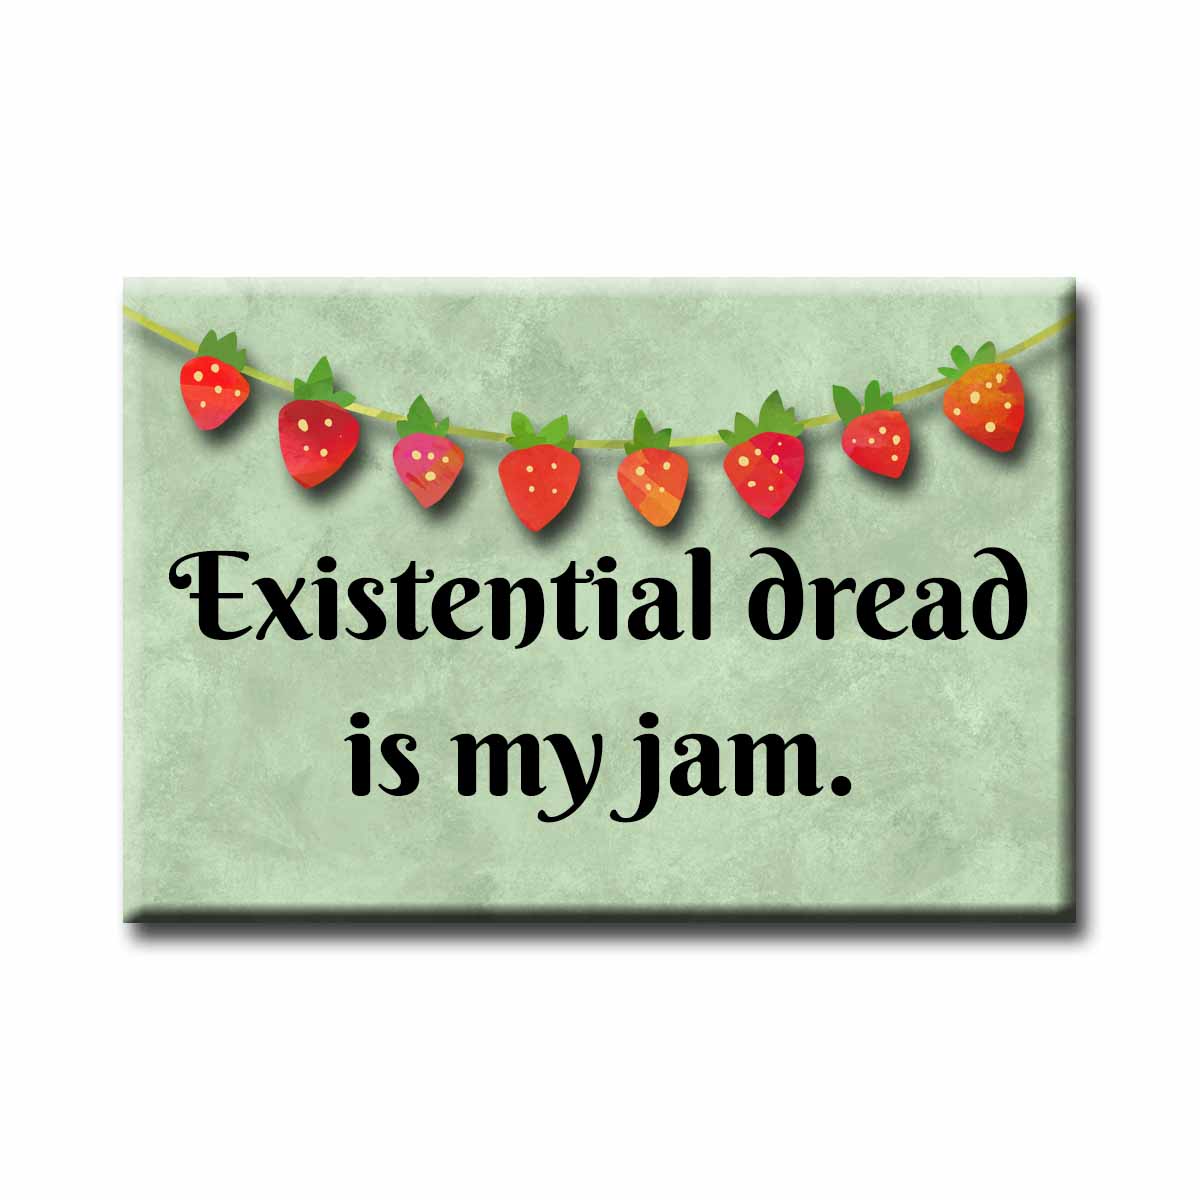 Existential Dread is My Jam Magnet